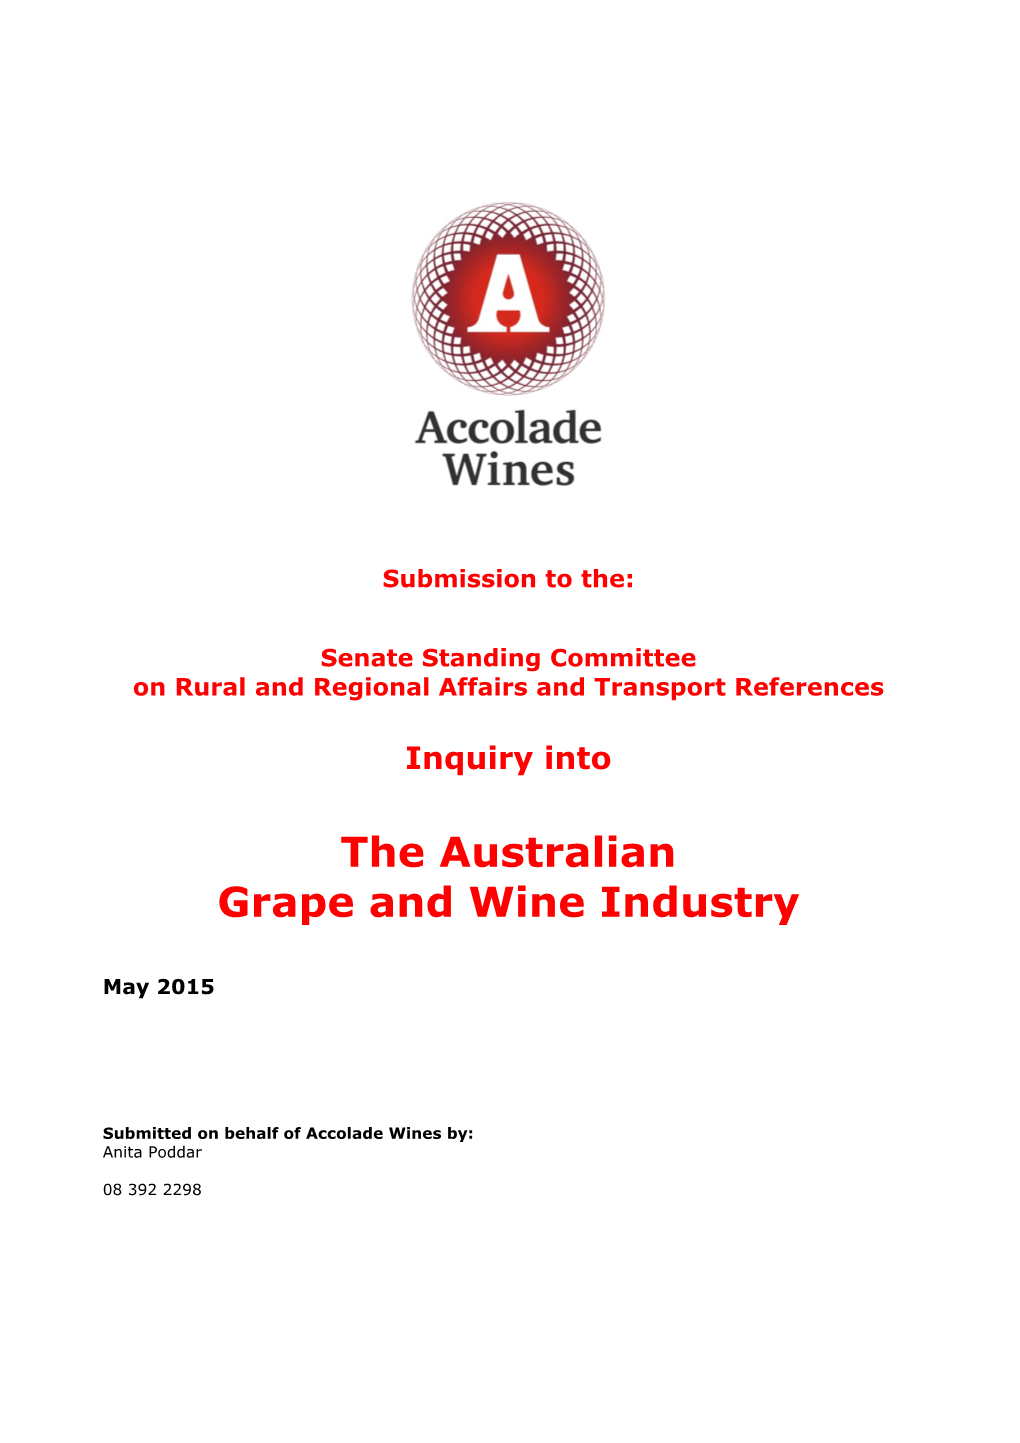 The Australian Grape and Wine Industry